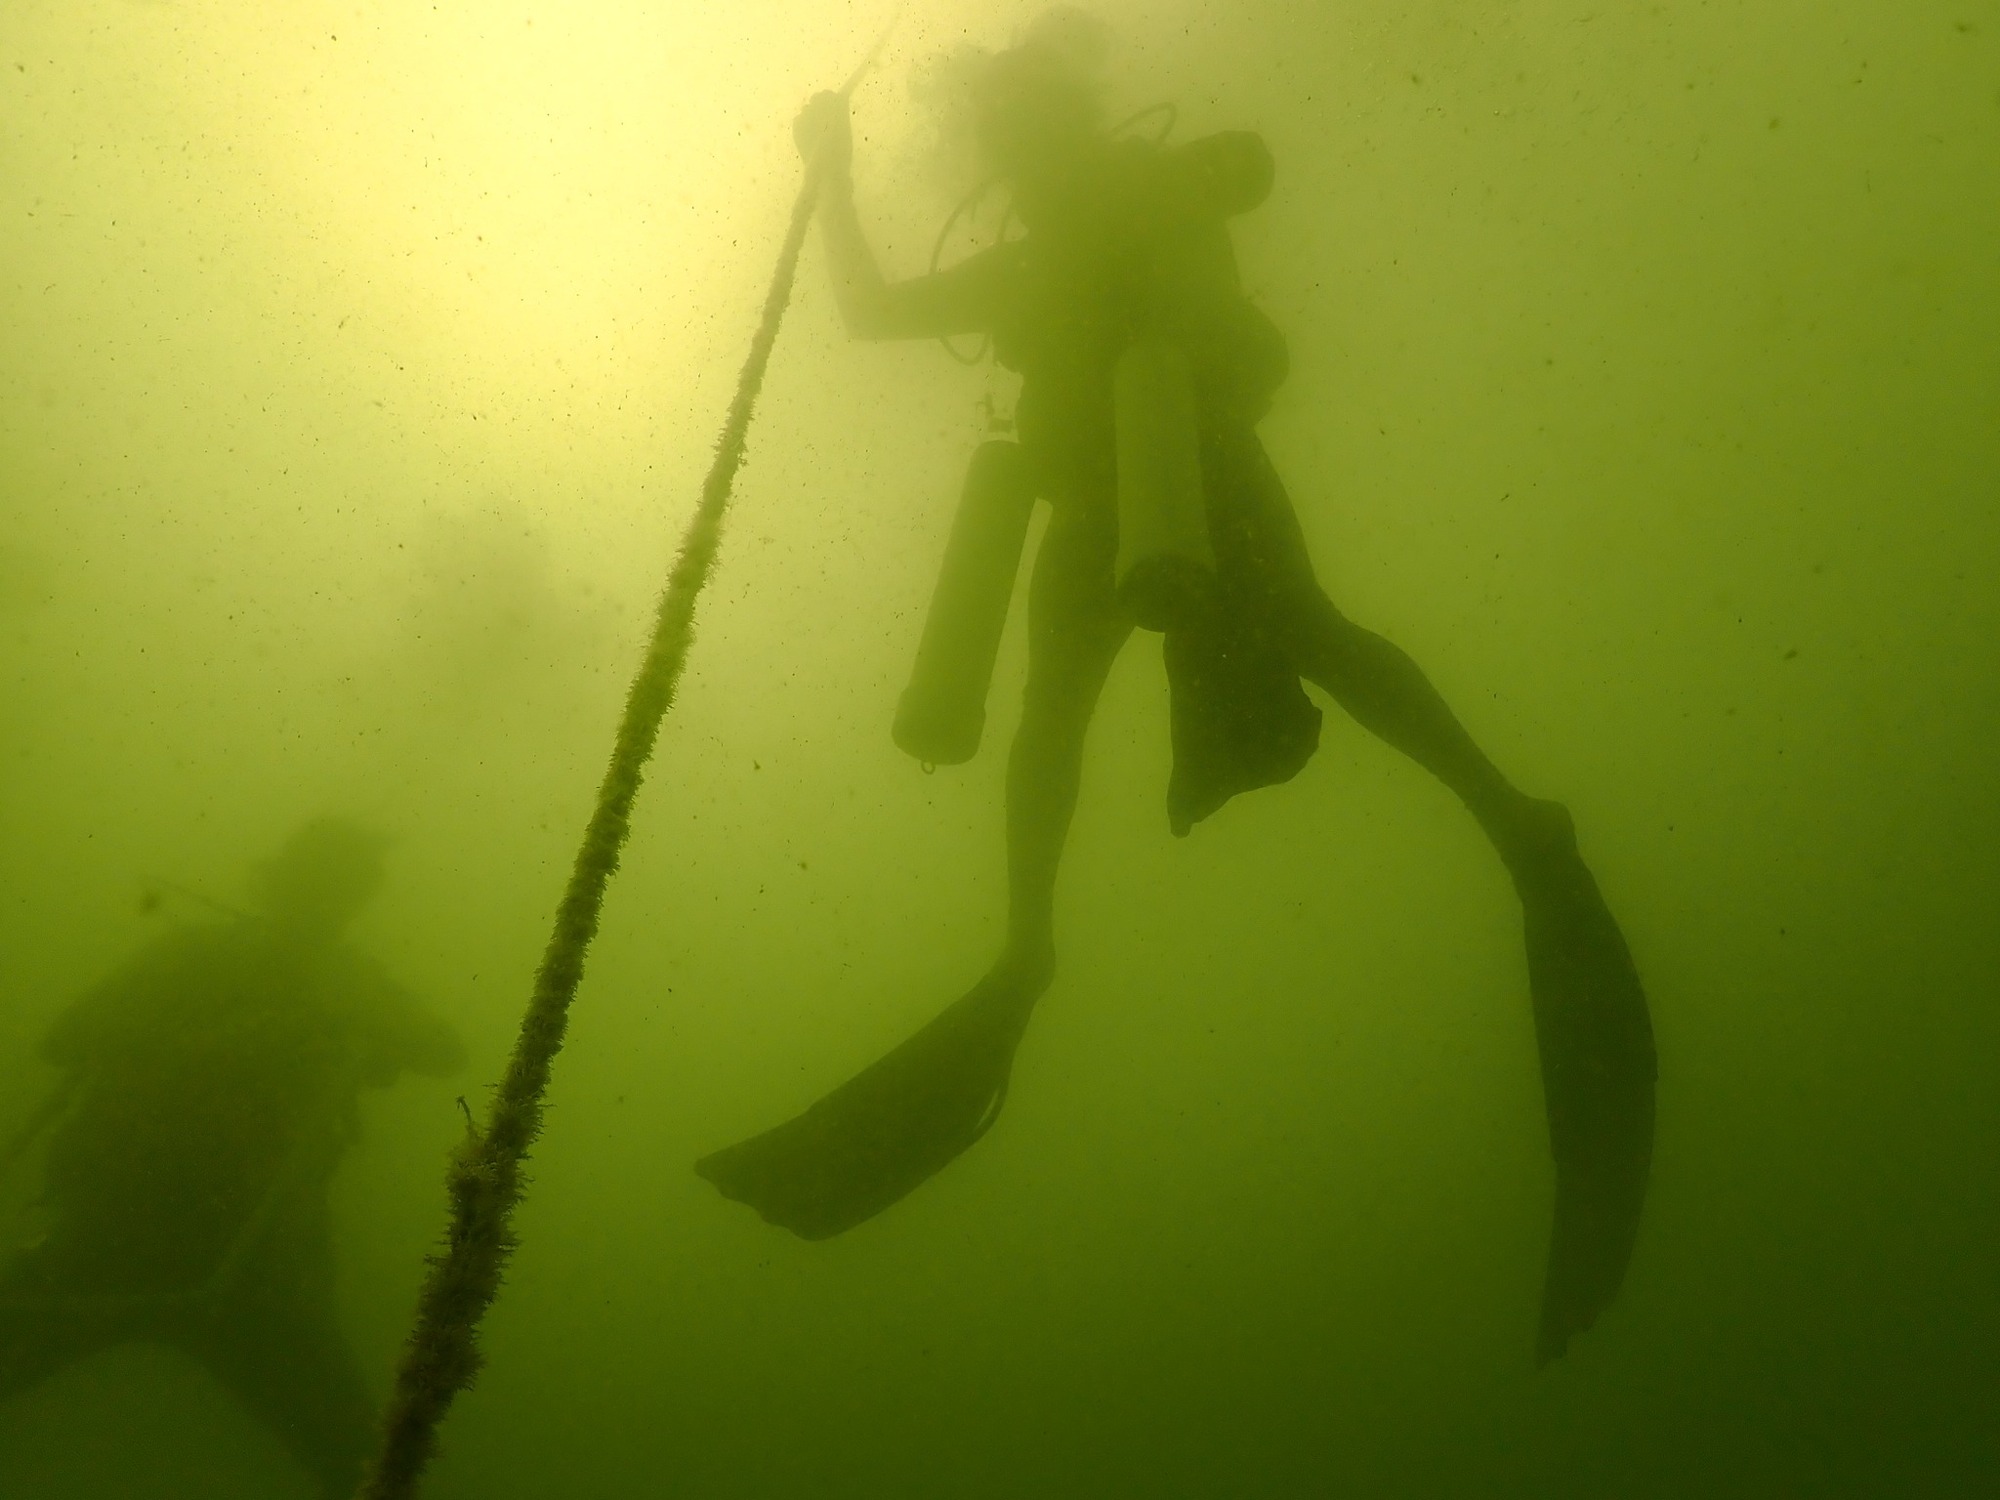 A team member ascending the buoy line. Silt, algae, and tannins in the water gave it this color. (Courtesy photo by James Douglass).